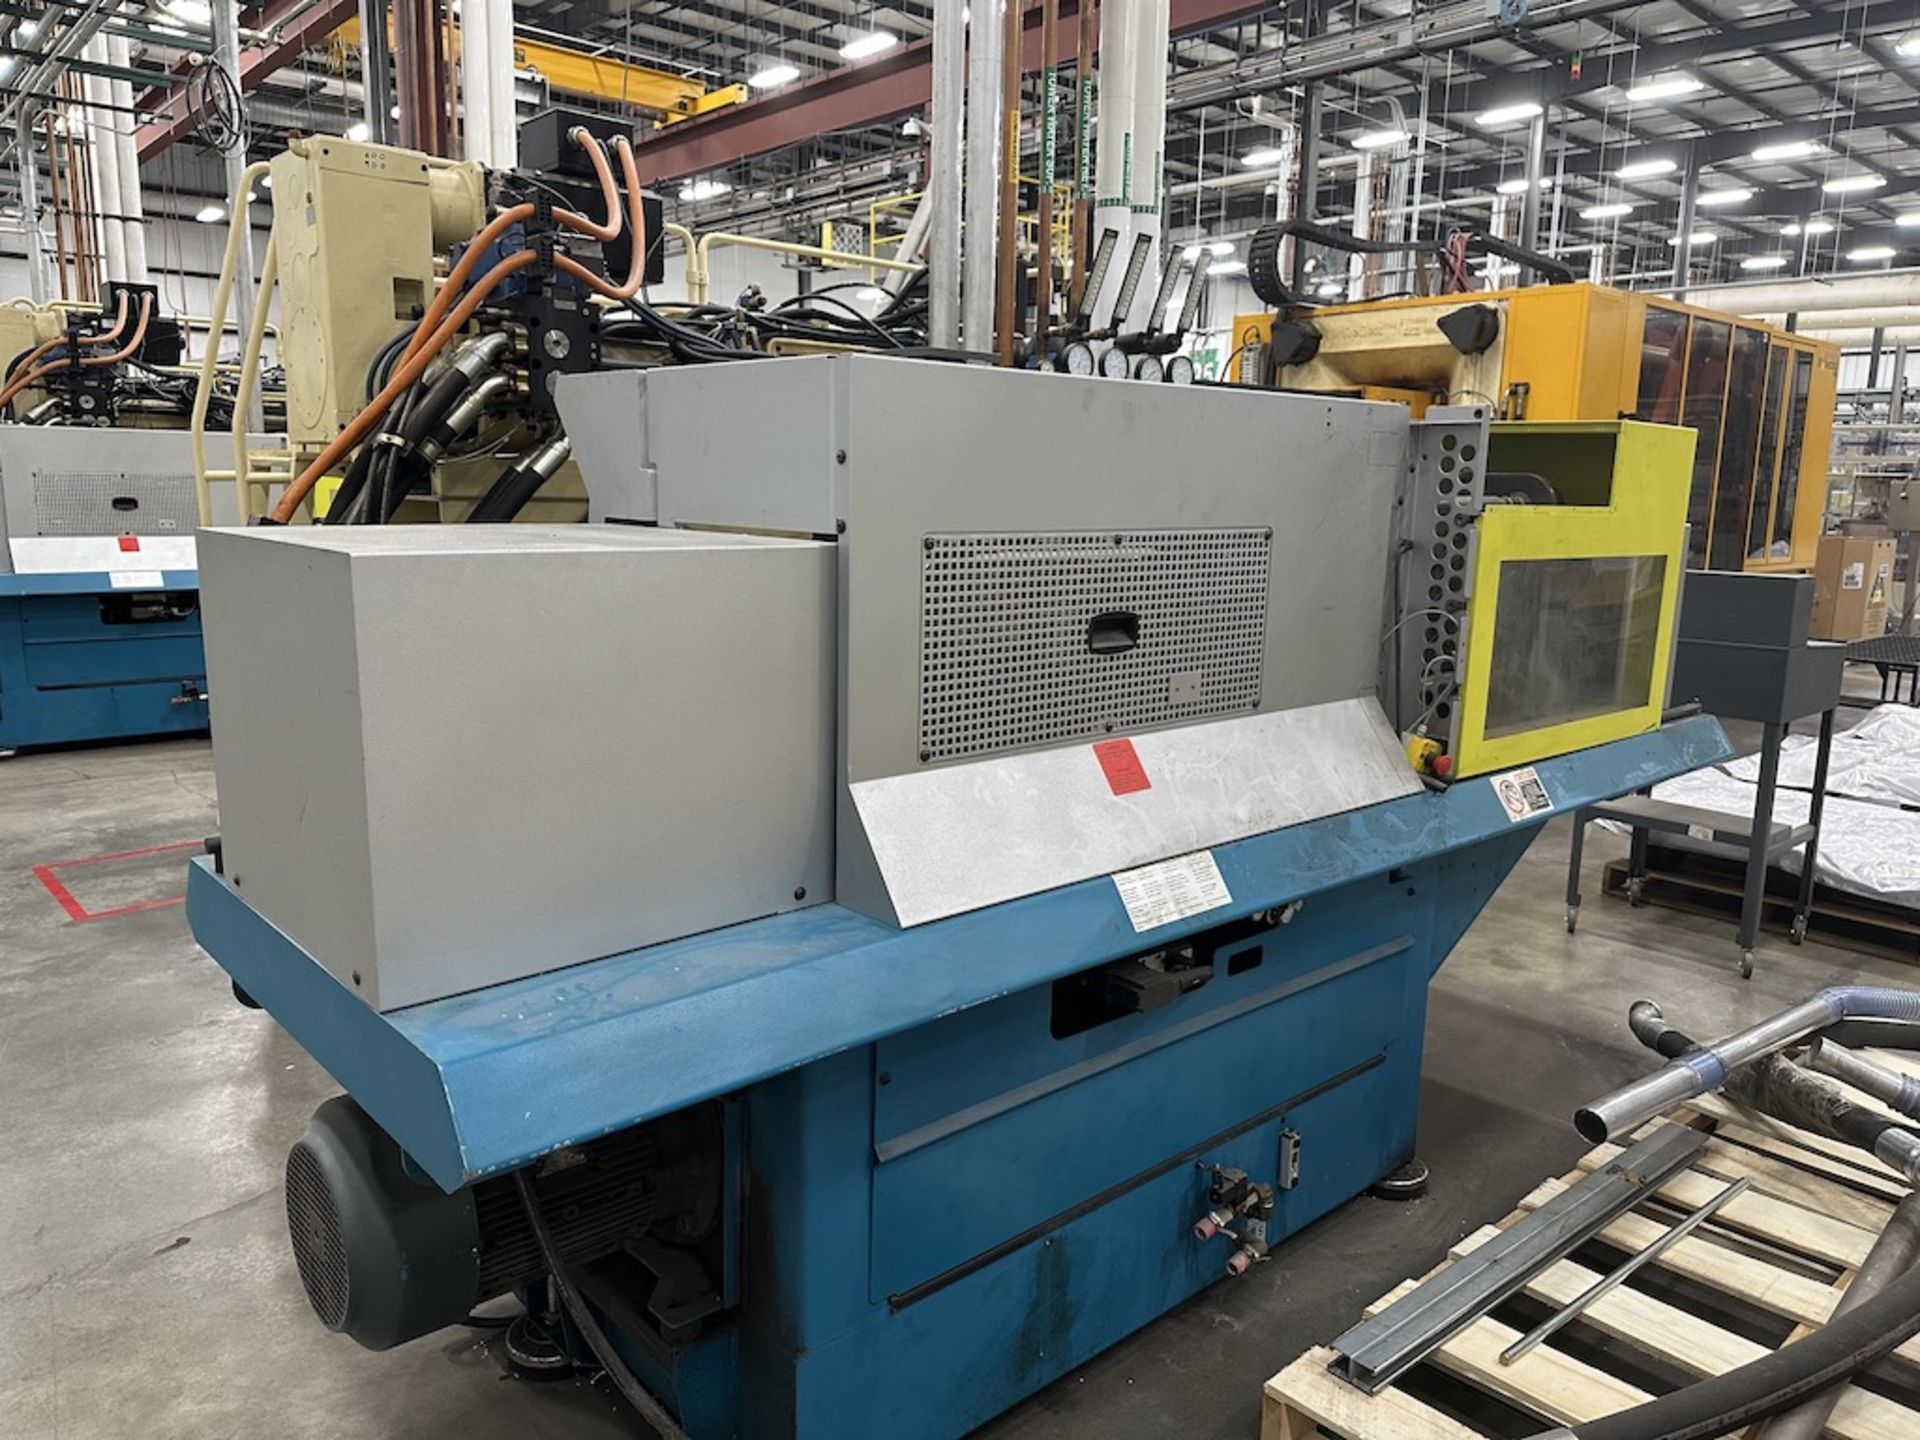 BOY 55M, 55 Ton Injection Molding Press, New in 2008 - Image 2 of 5